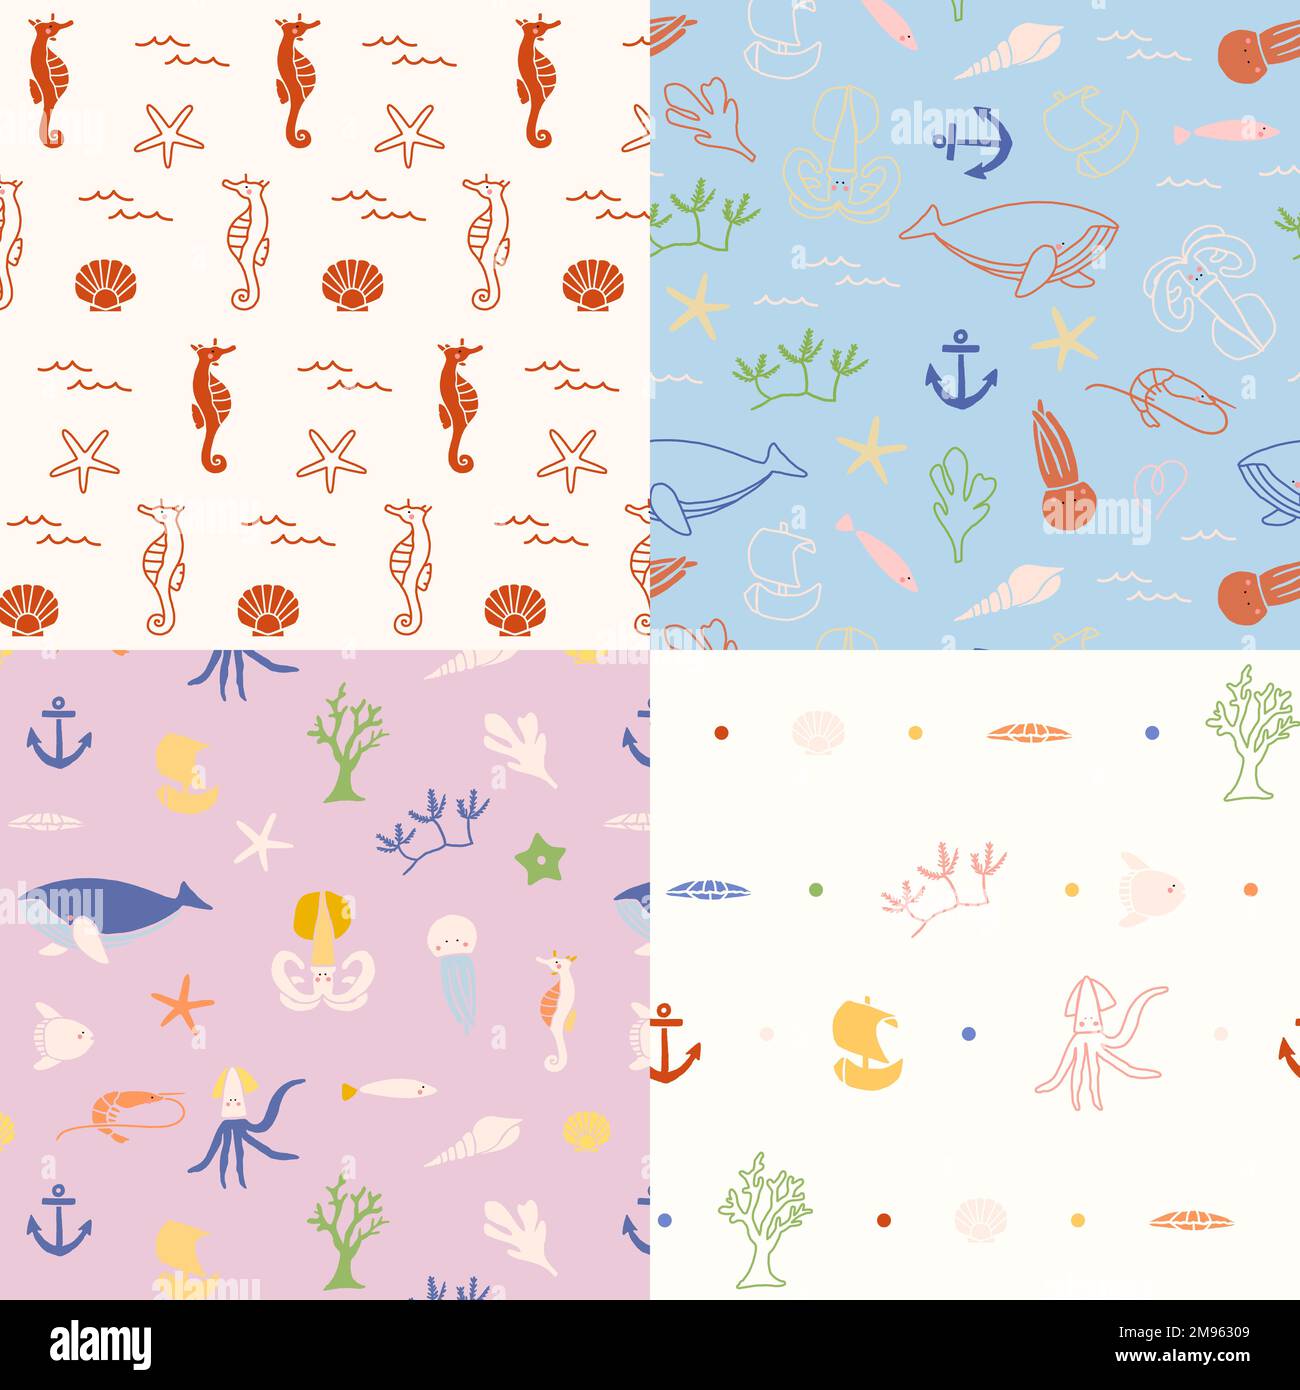 Underwater animals seamless pattern collection vector Stock Vector